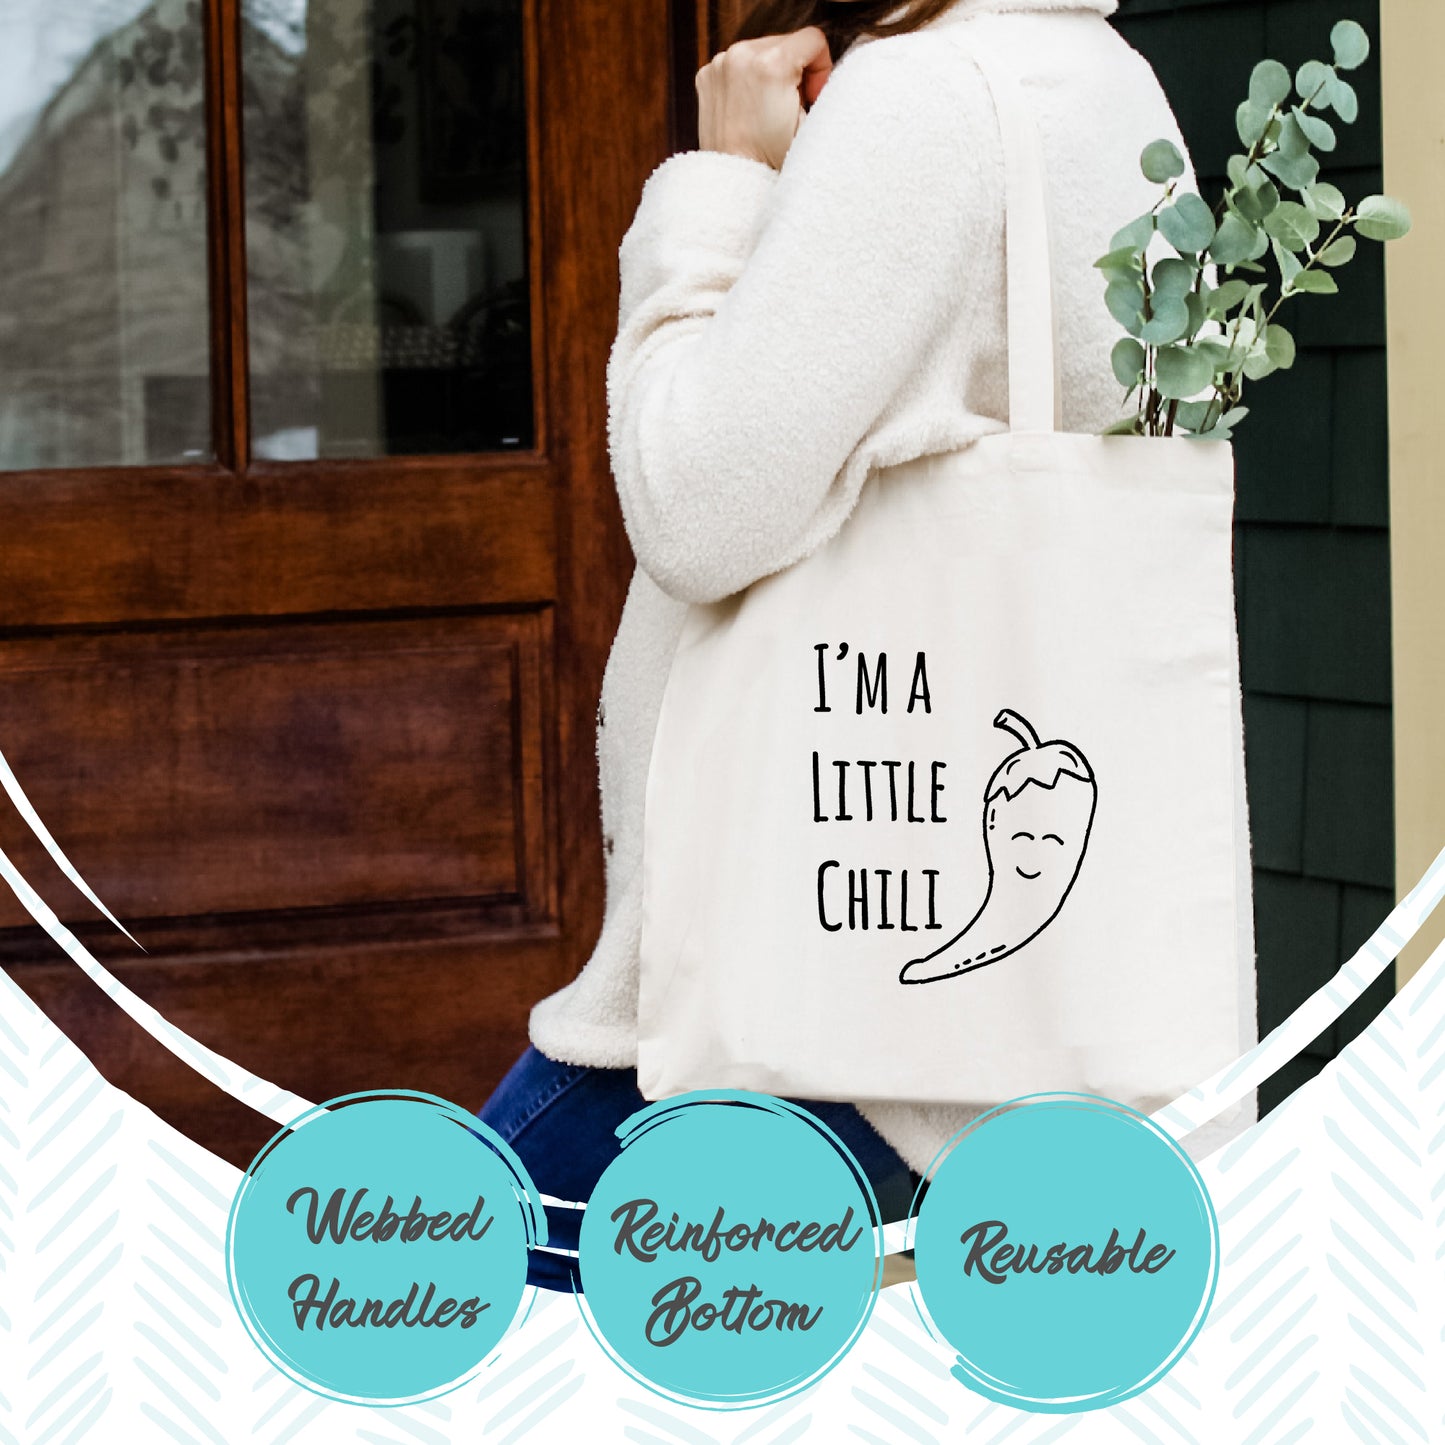 My Crystal Ball Thinks You Are Full Of S*** - Tote Bag - MoonlightMakers